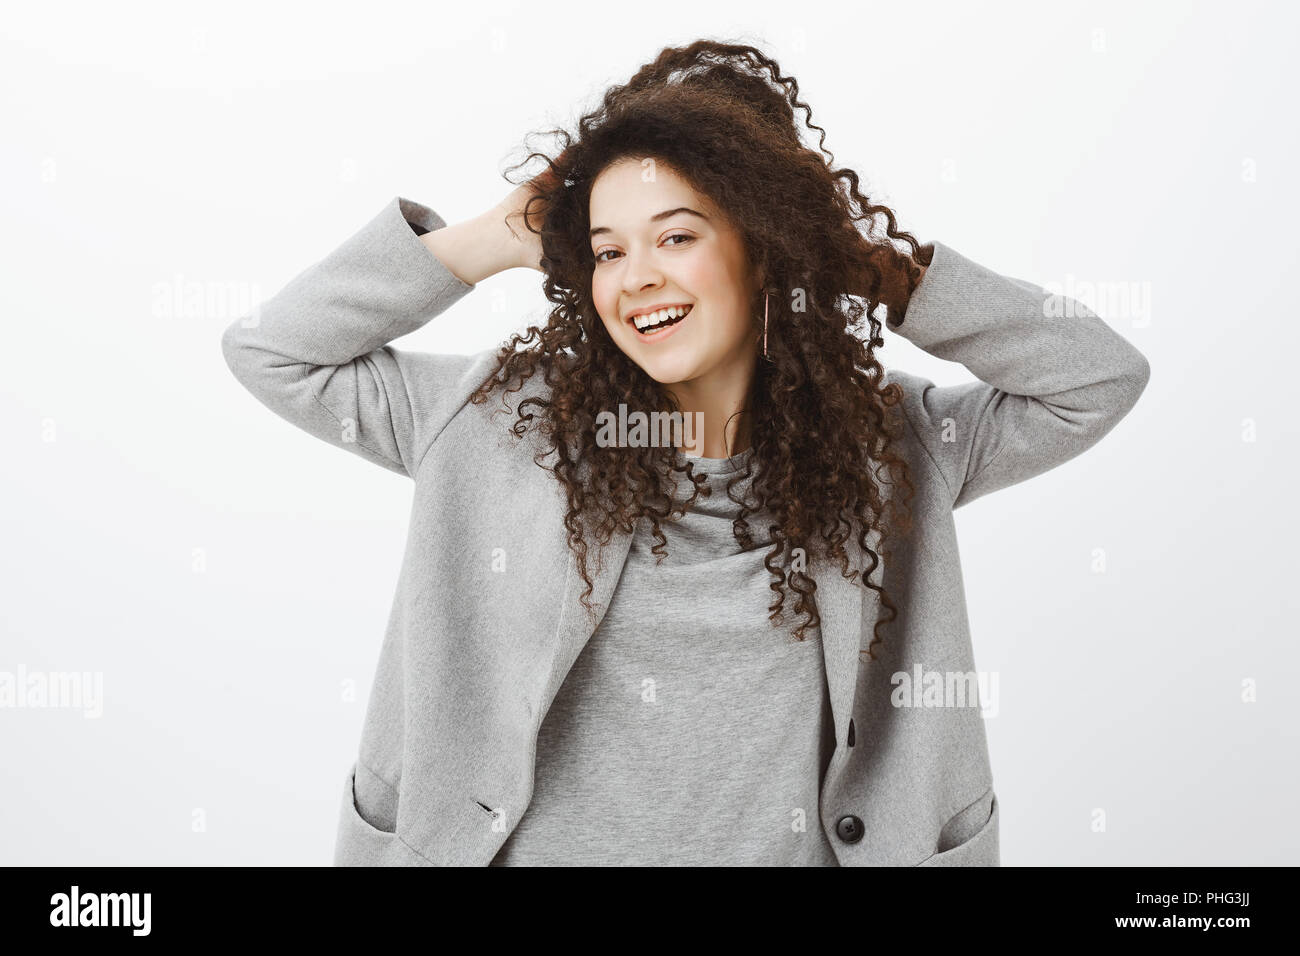 Girl feeling releived and carefree after visiting spa. Joyfull bright european female with curly hair in grey coat, touching curls and smiling broadly, expressing awesome and pleased attitude Stock Photo